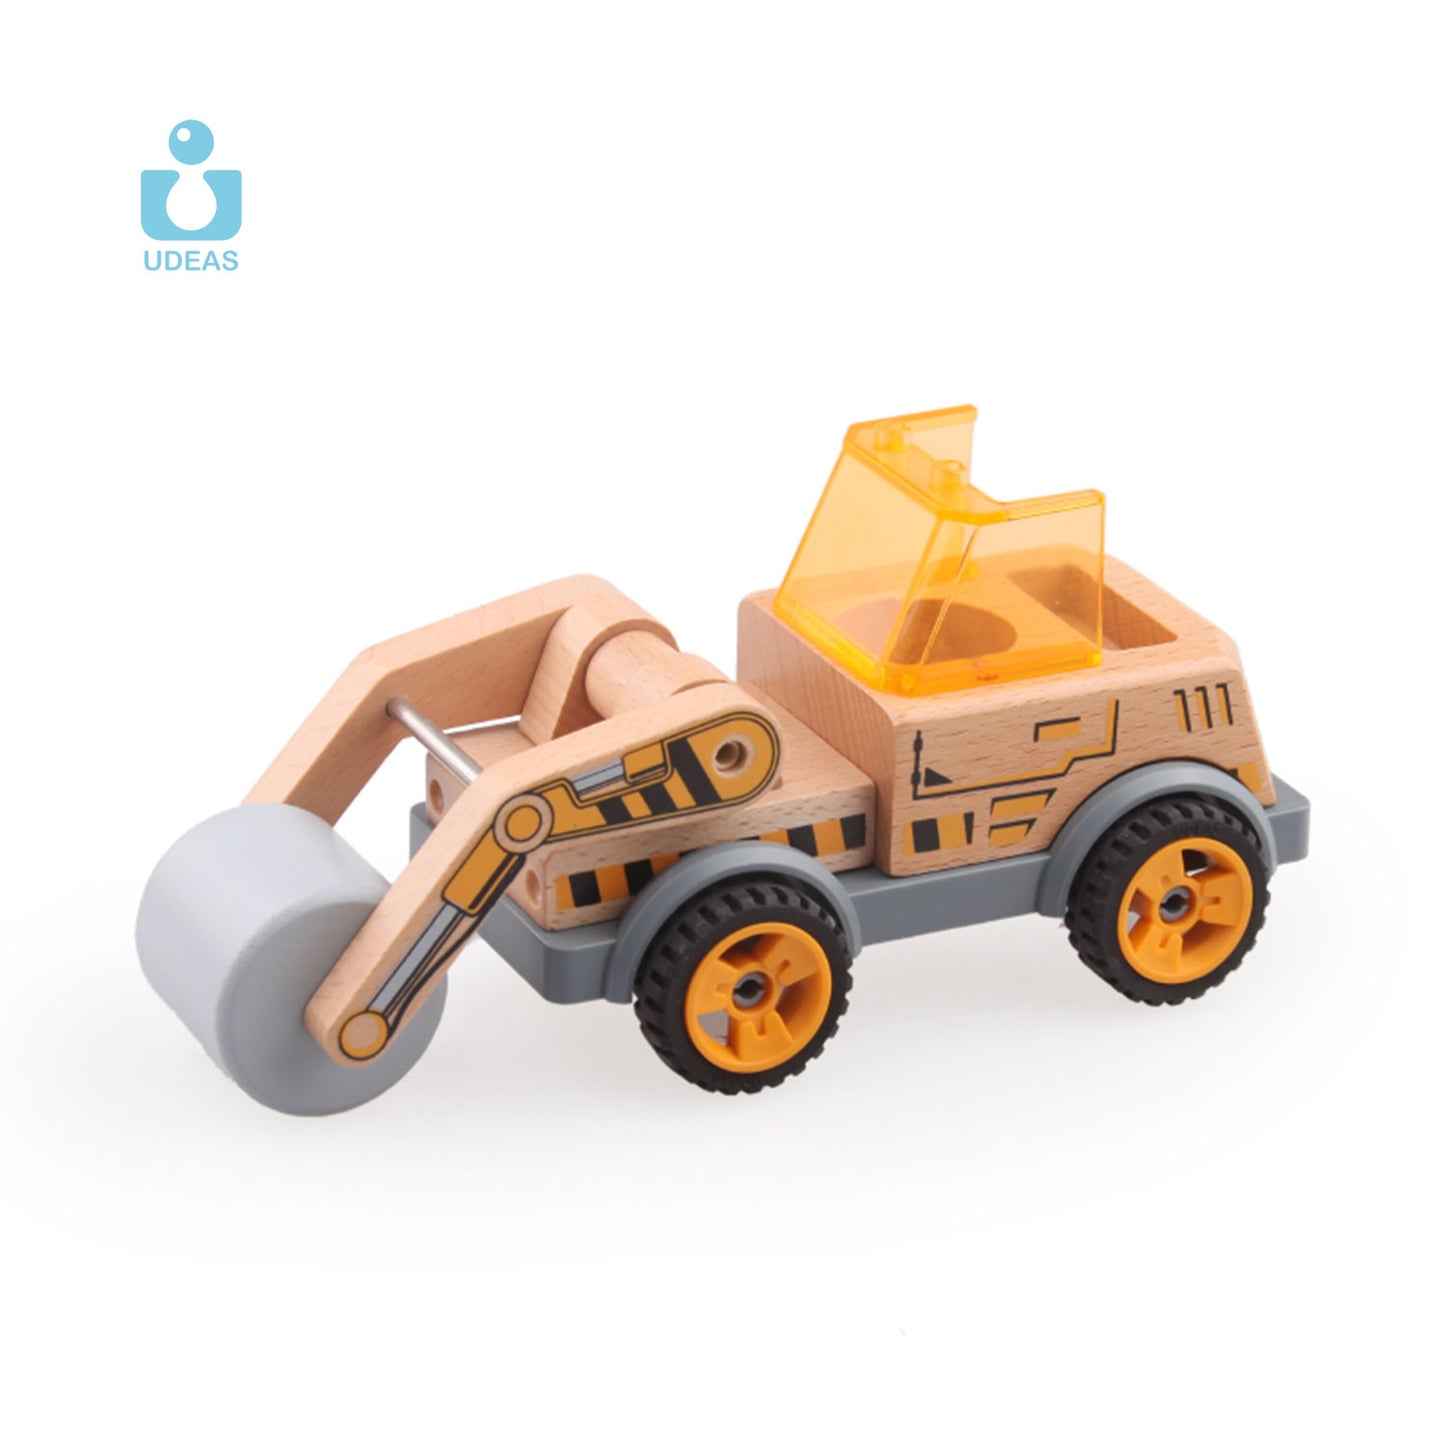 Road roller toy